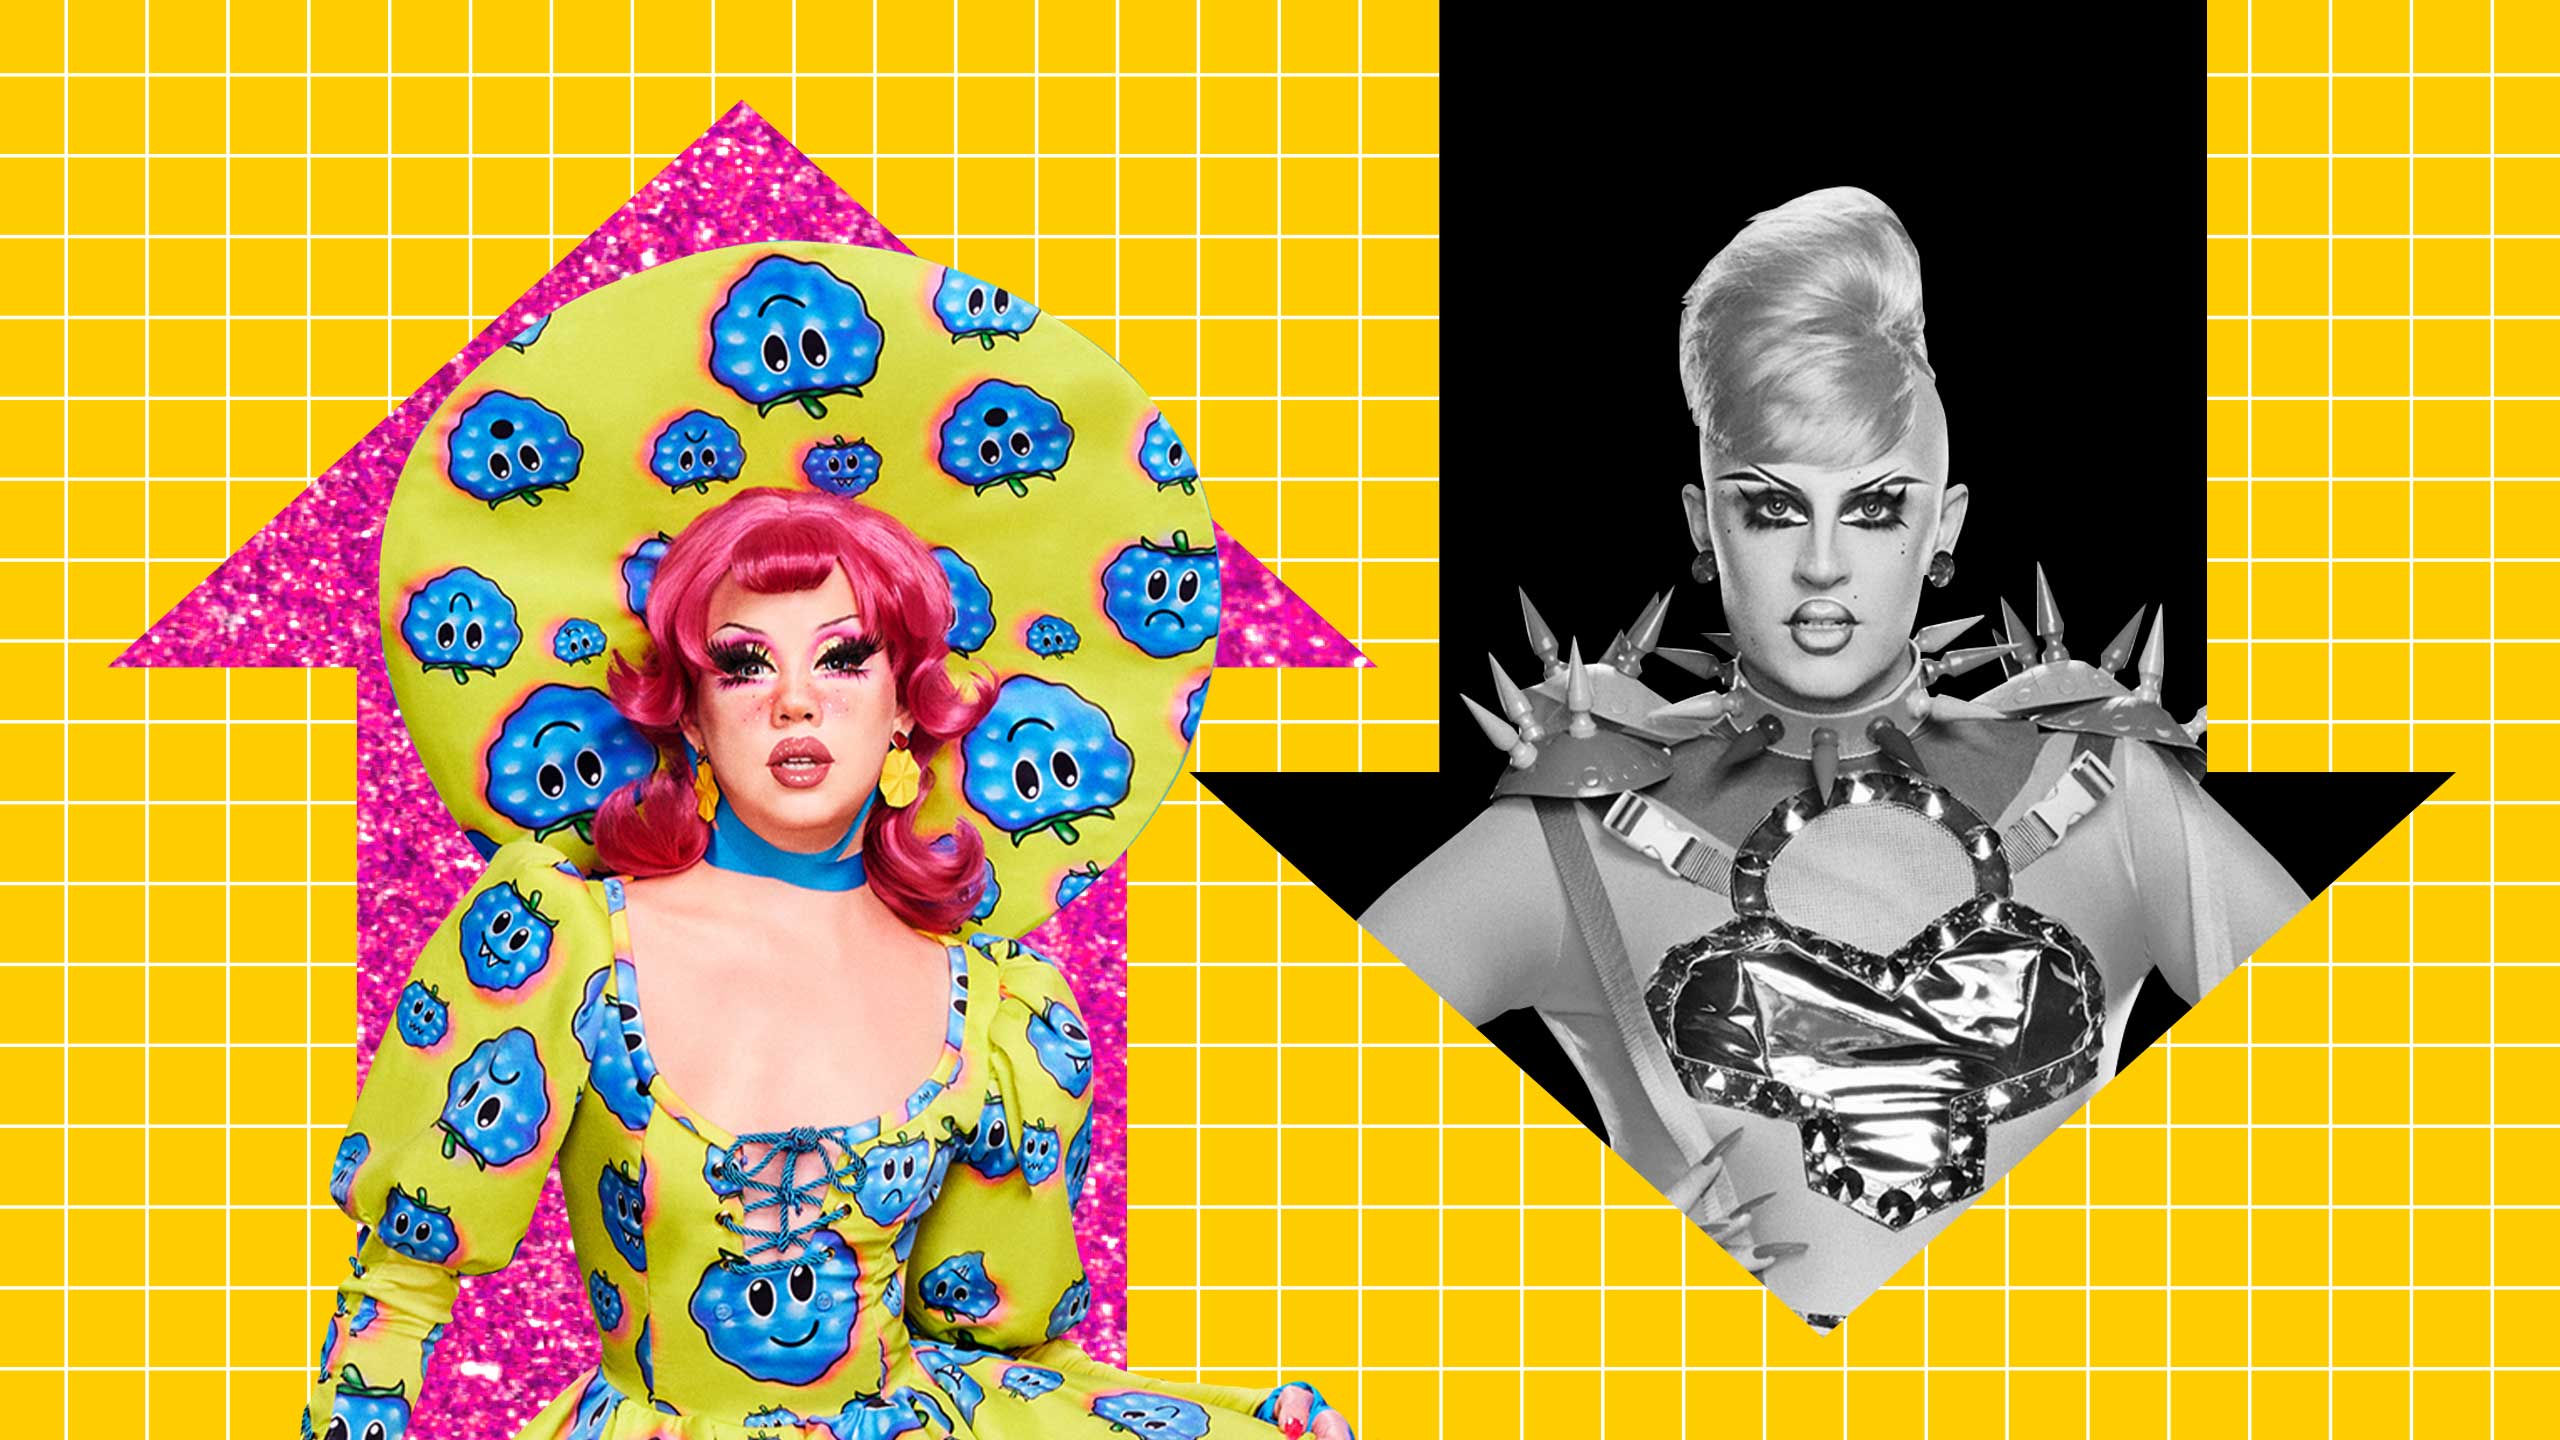 Behind the Rise of 'RuPaul's Drag Race